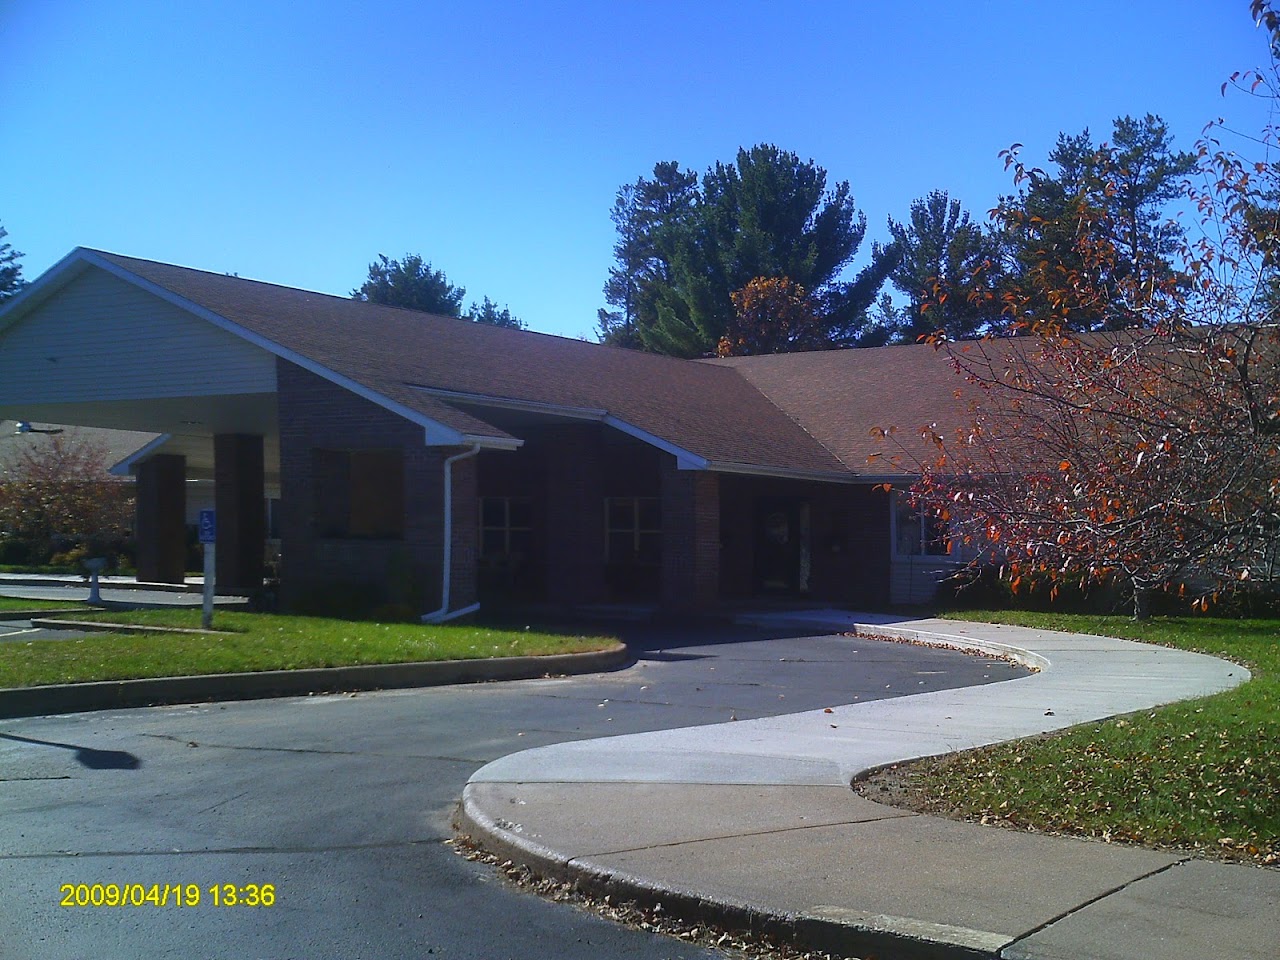 Photo of NYMAN AVENUE AFFORDABLE HOUSING TOWNHOMES. Affordable housing located at 117 GUARD ST HAYWARD, WI 54843